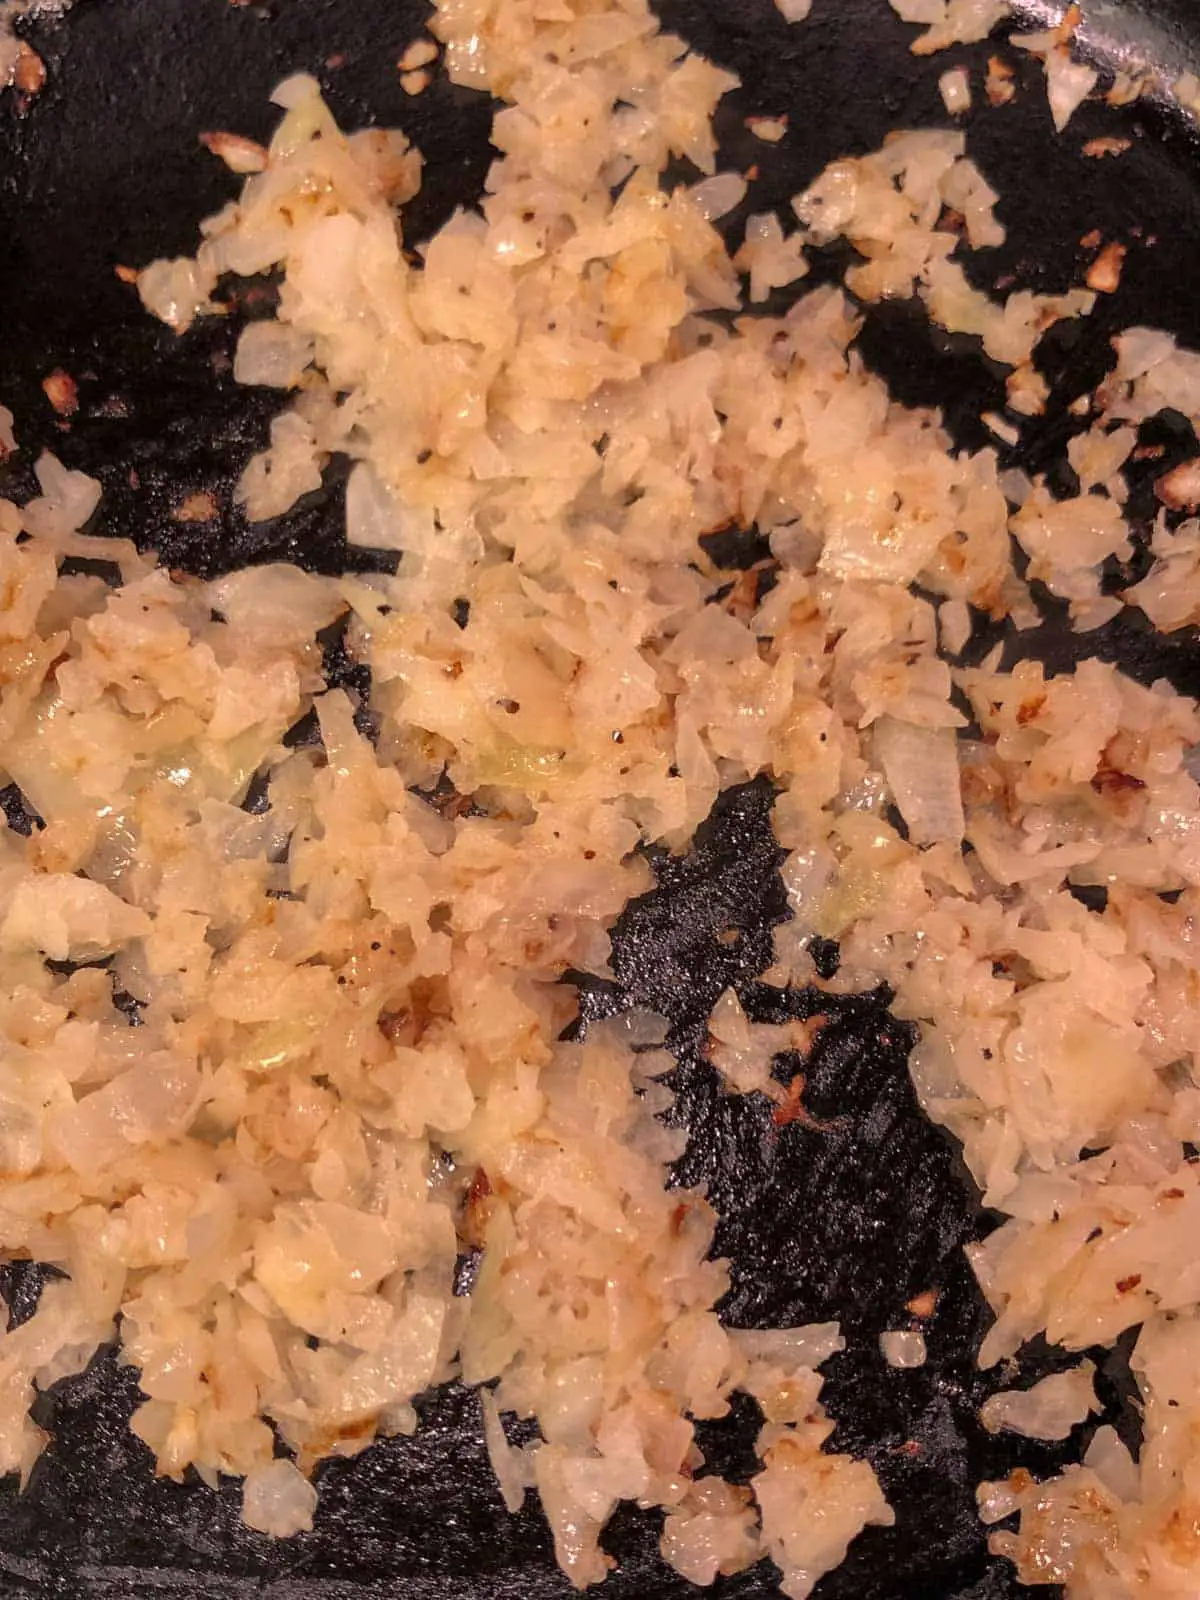 Diced onion which as been browned in a cast iron skillet.